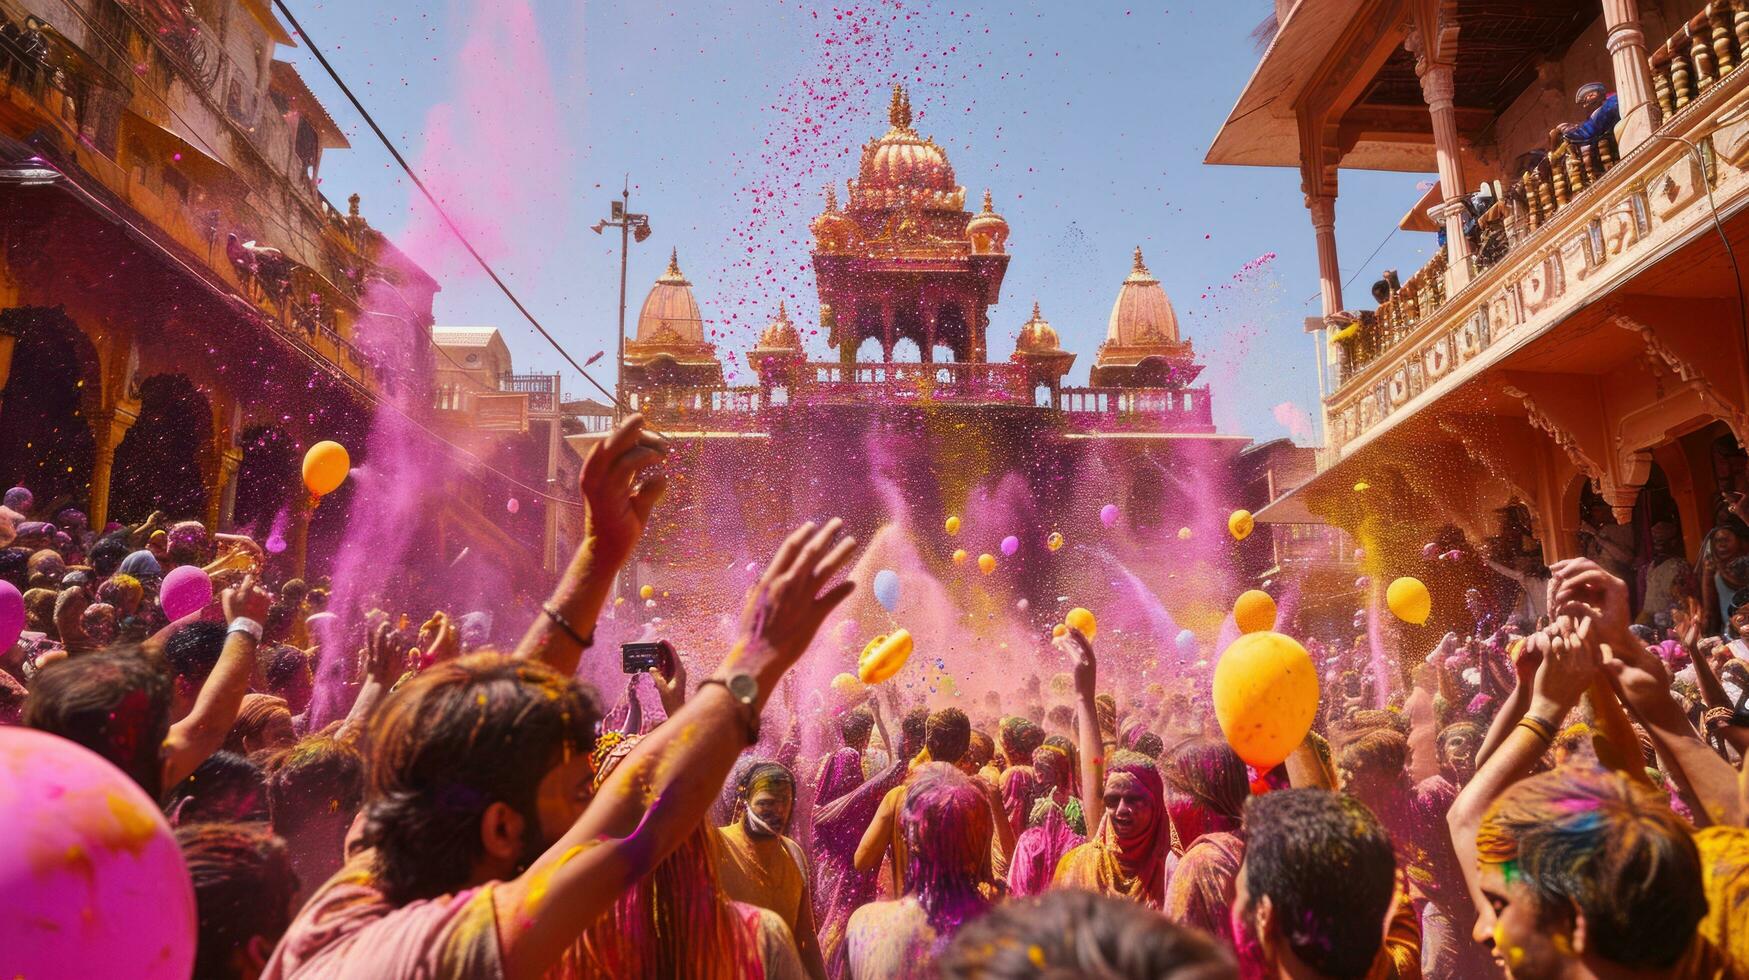 AI generated Spectrum of colors, water balloons, and gleeful chaos characterize a lively Holi scene photo